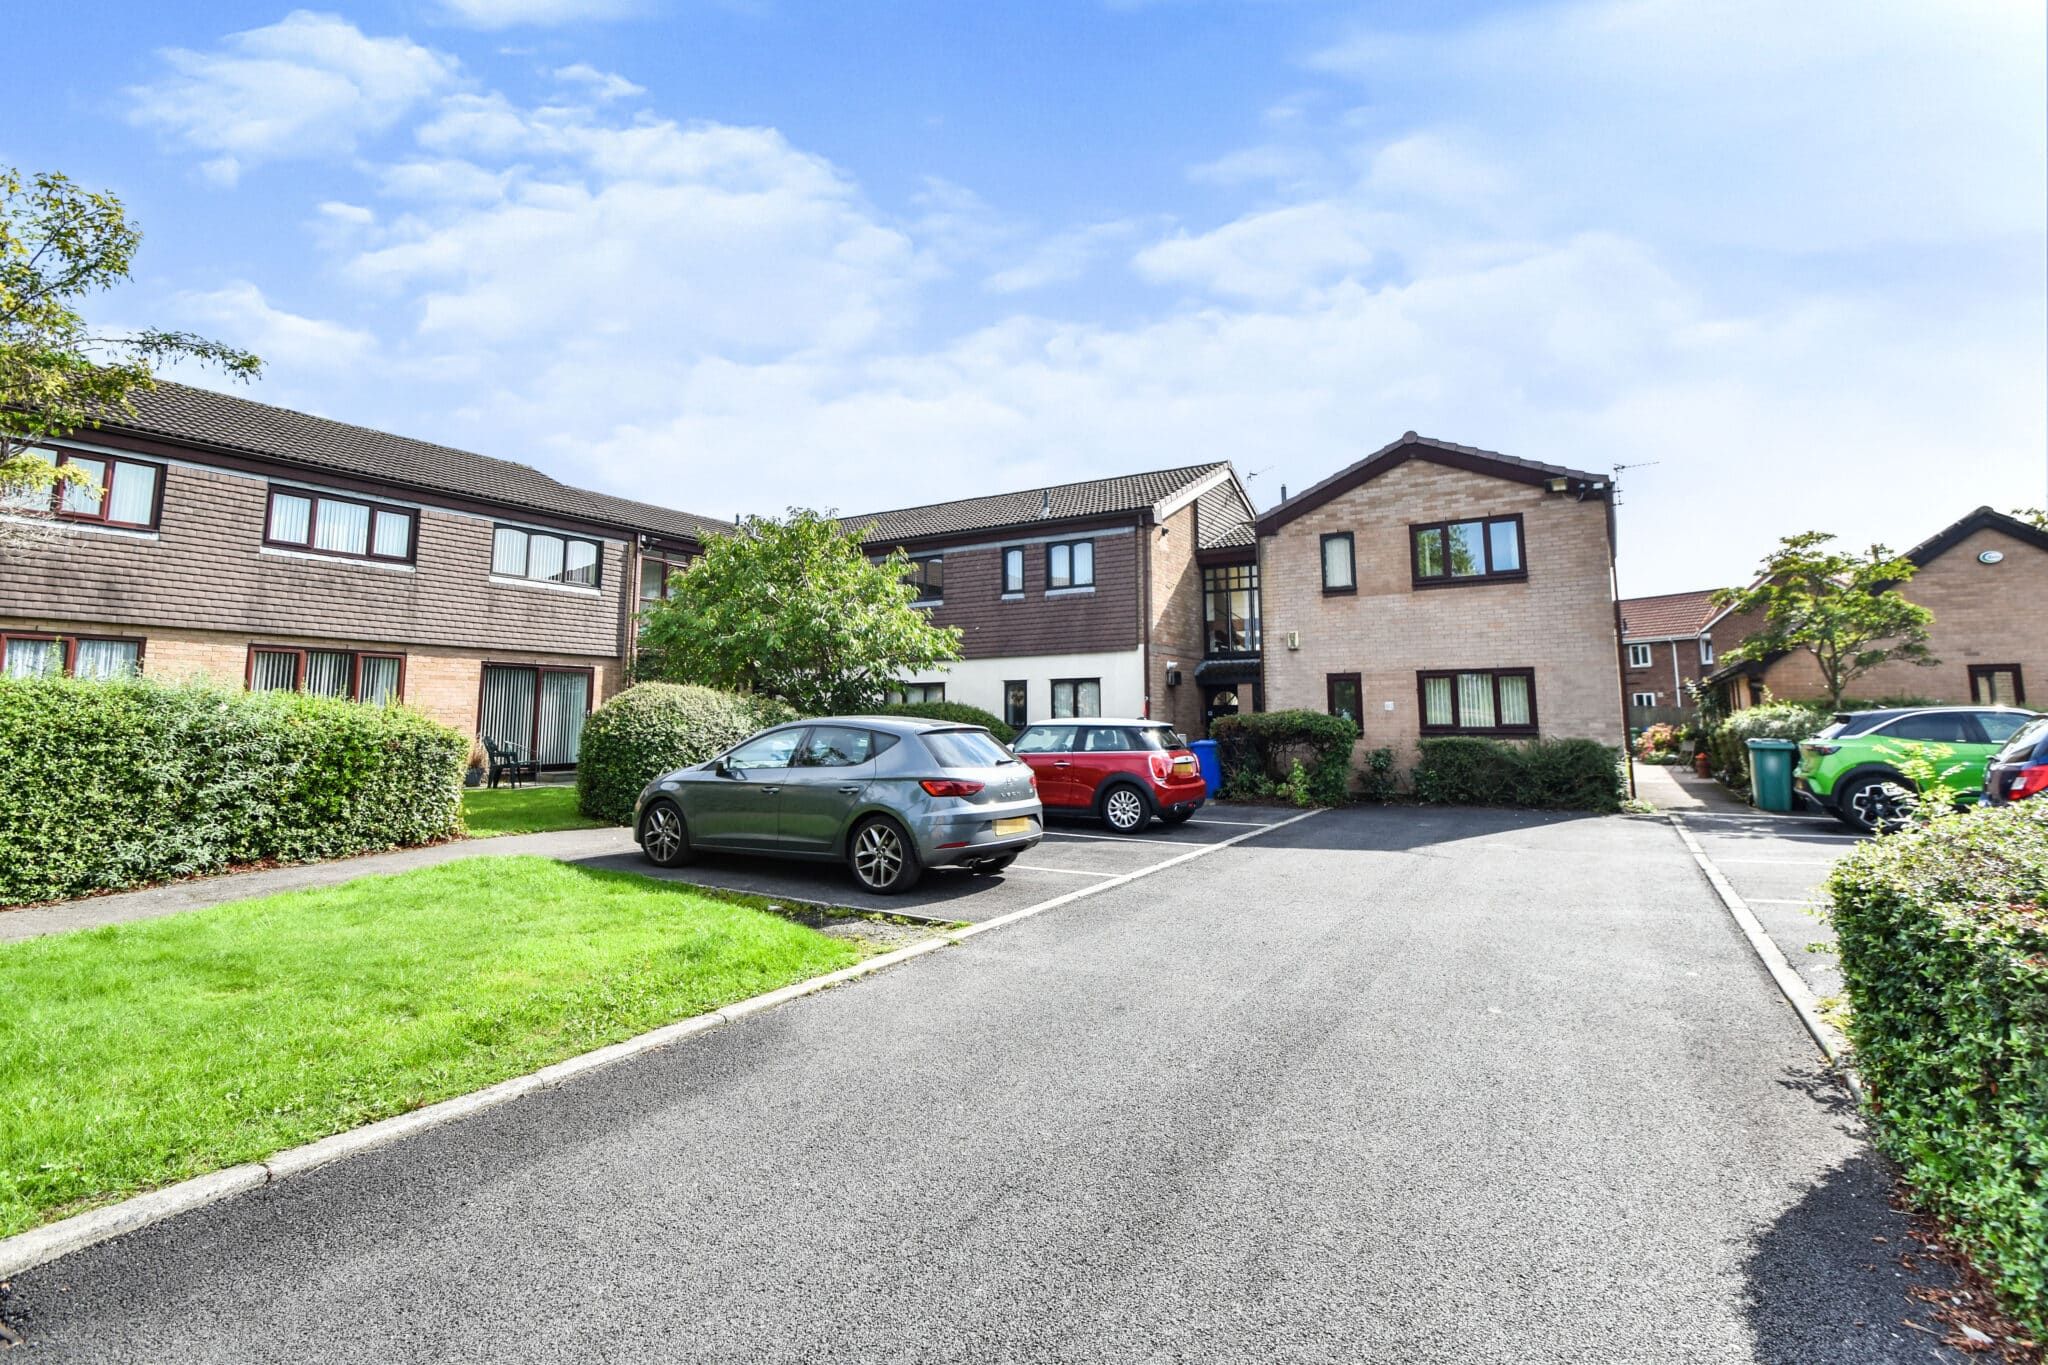 Pilkington Drive, Whitefield, Manchester, Manchester, M45 8JX